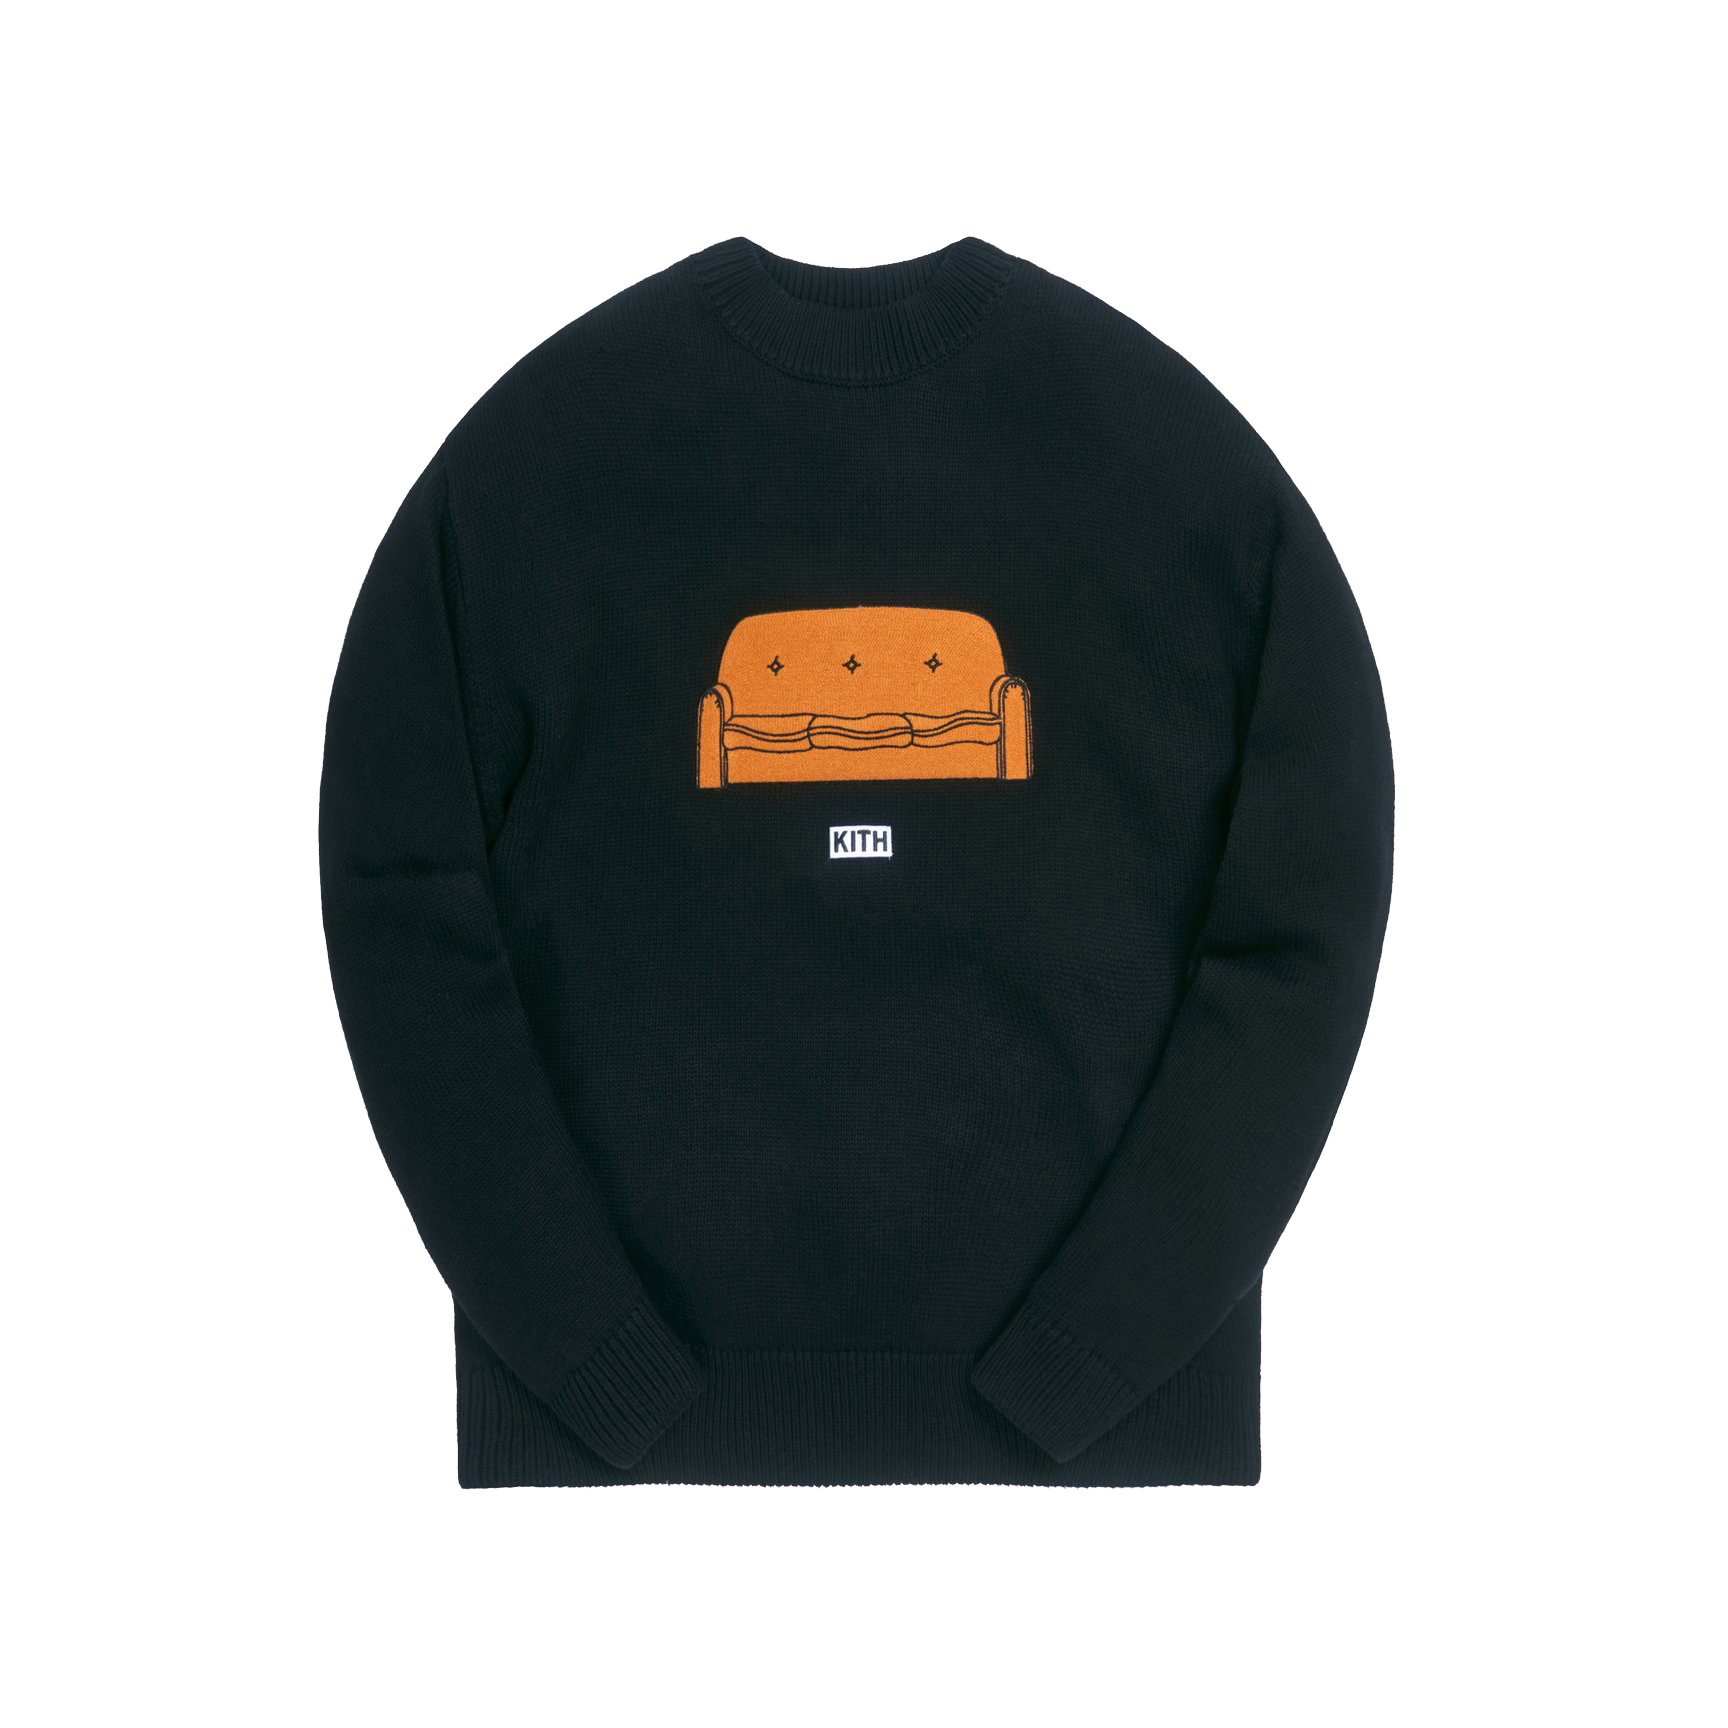 Kith x The Simpsons Couch Intarsia Sweater Black Men's - SS21 - US